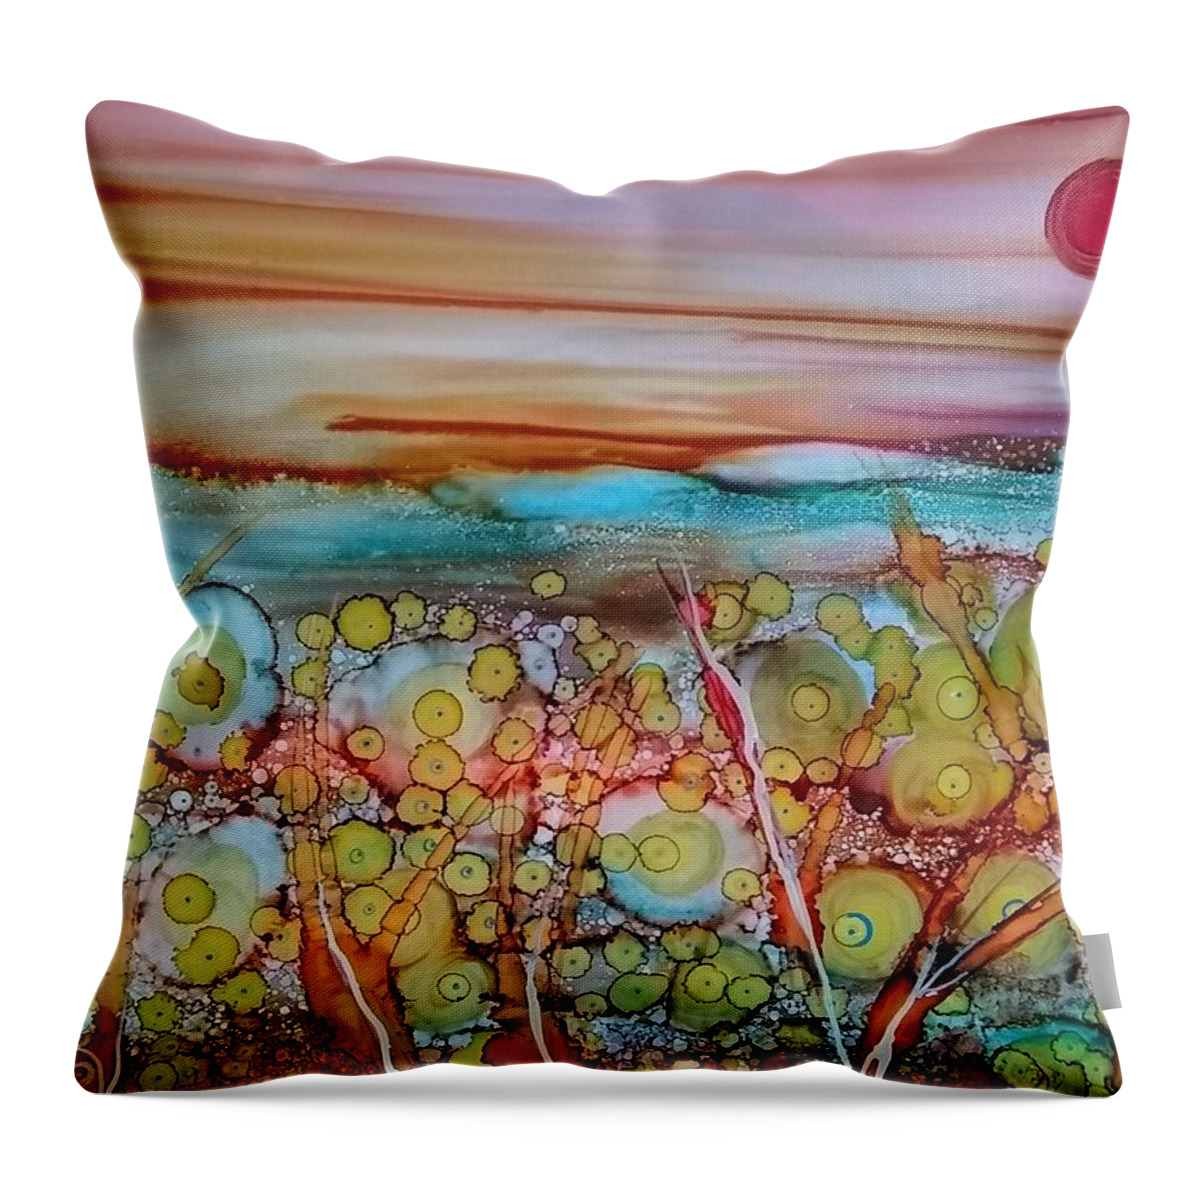 Alcohol Inks Prints Throw Pillow featuring the painting Summer Daze by Betsy Carlson Cross